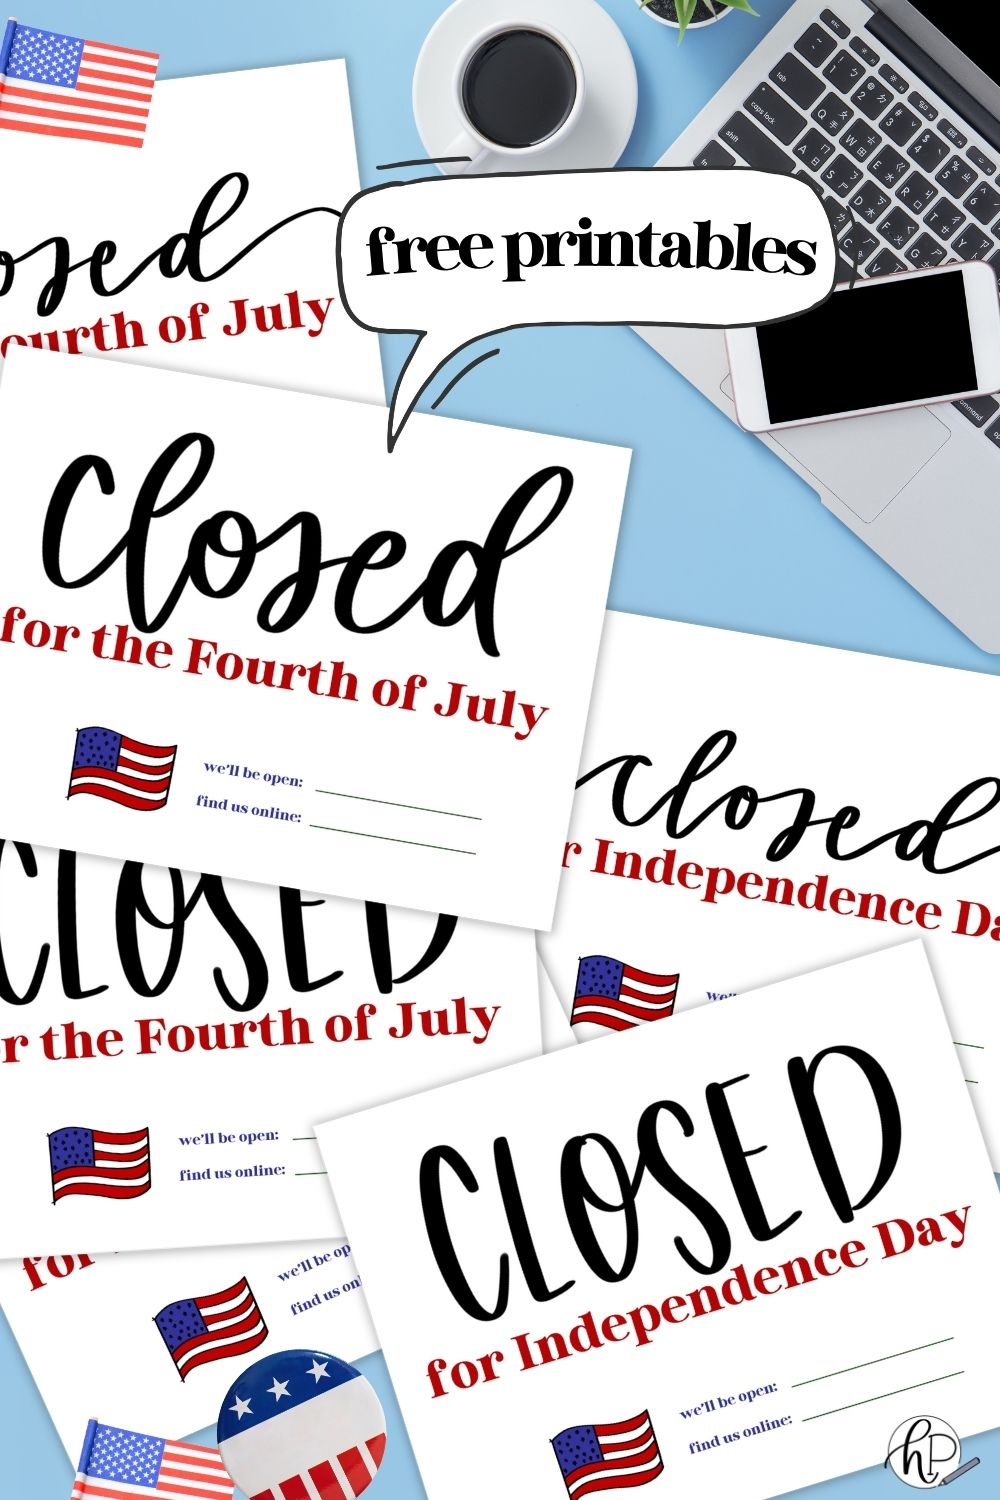 Closed for Independence Day signs shown printed on blue desktop next to laptop and coffee. signs have hand lettering, clear typography and a hand illustrated USA flag with room for holiday hours and social media tag or website. Signs read closed for independence day and closed for the fourth of july text over reads: free printables